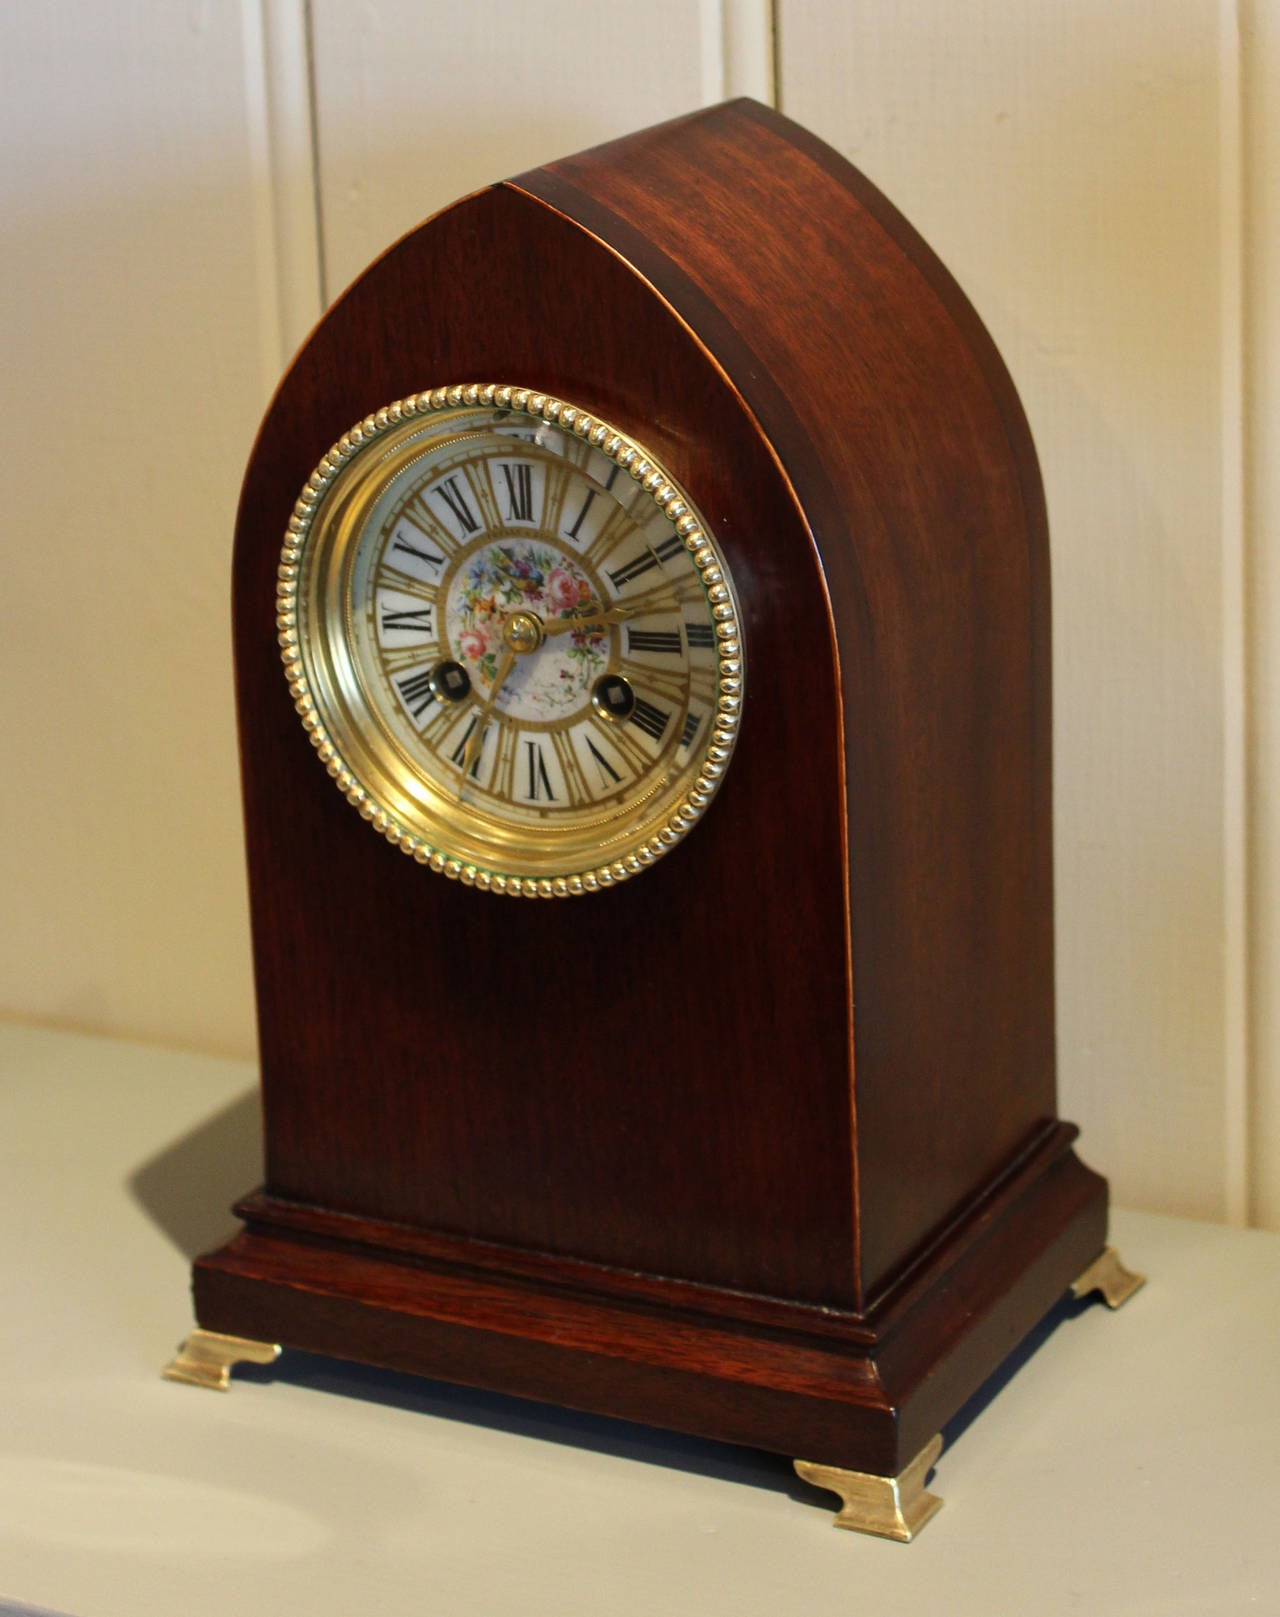 A solid mahogany mantel clock by Tiffany. The case has a lancet top with boxwood edging and brass ogee feet. It has a beaded brass bezel with a thick bevel edge glass and a ceramic painted enamel dial that is decorated with birds among floral